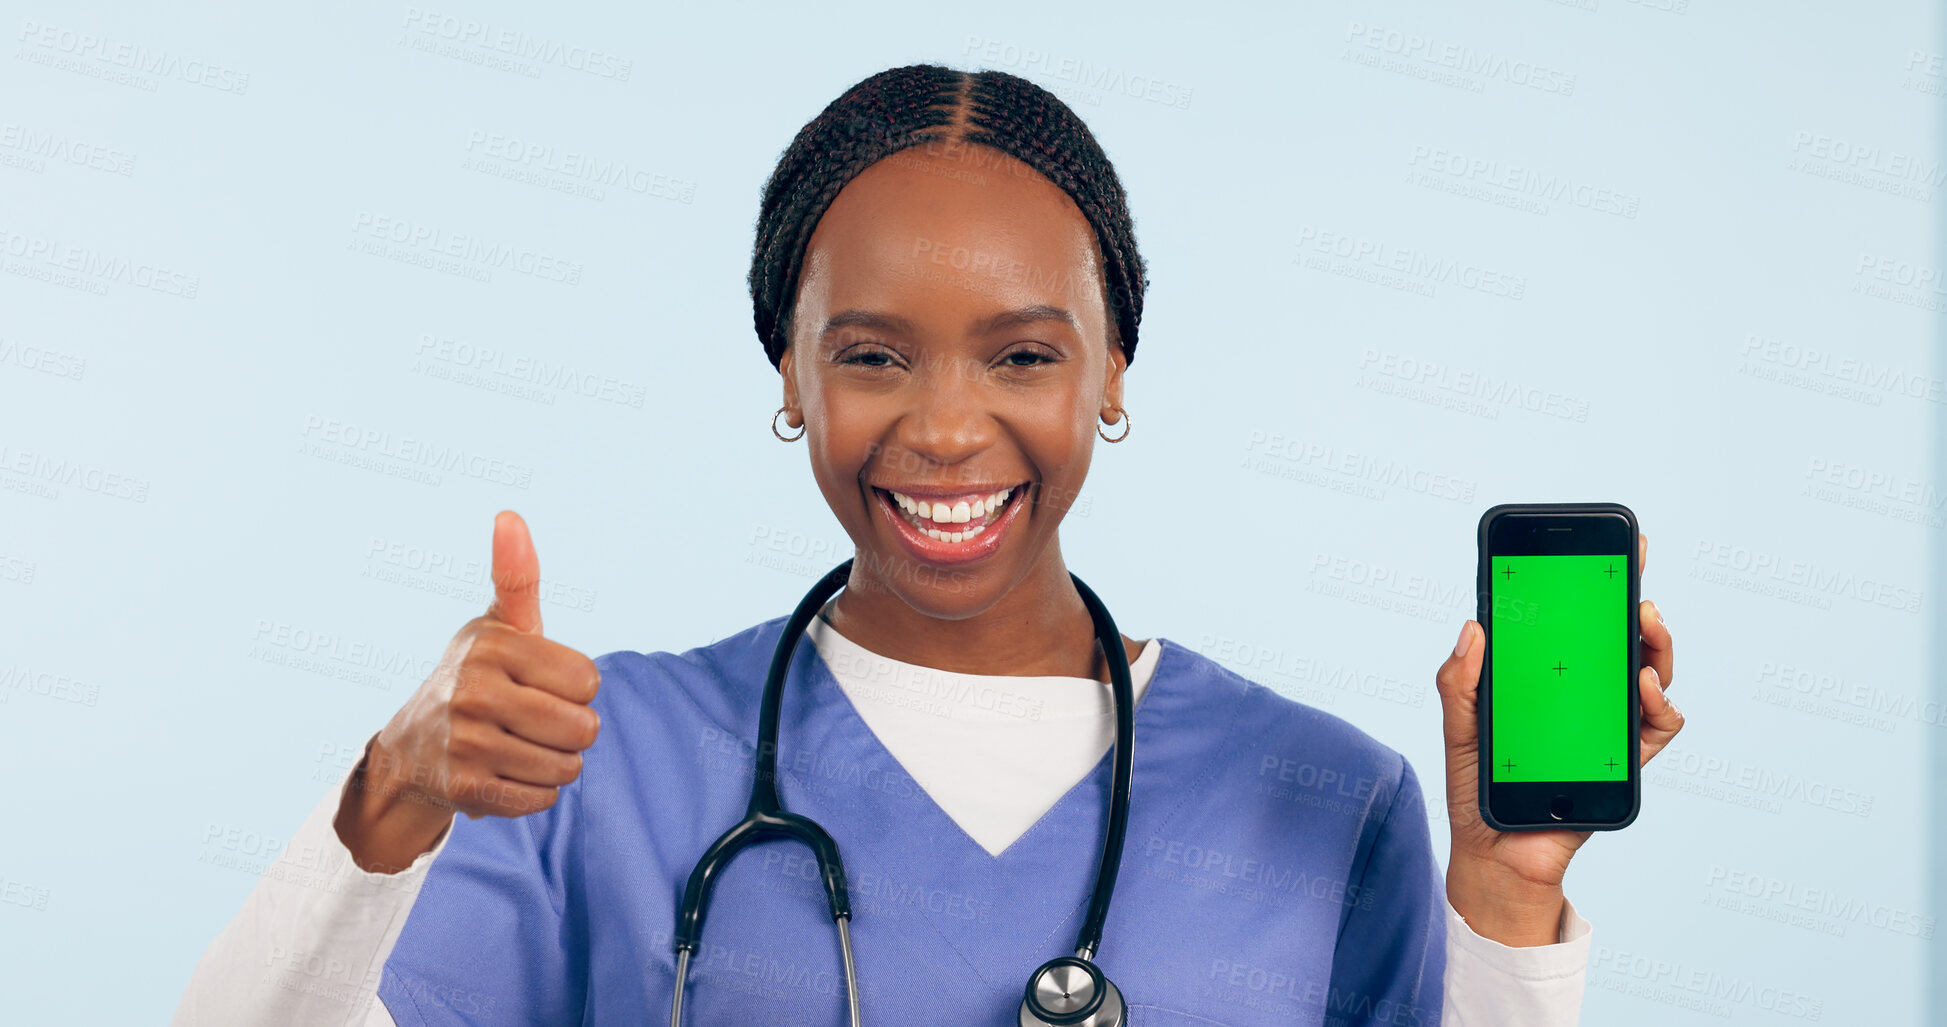 Buy stock photo Green screen, thumbs up and portrait of doctor with phone for telehealth, wellness app or medical news. Healthcare, mockup or black woman with hand sign on smartphone for website in studio background